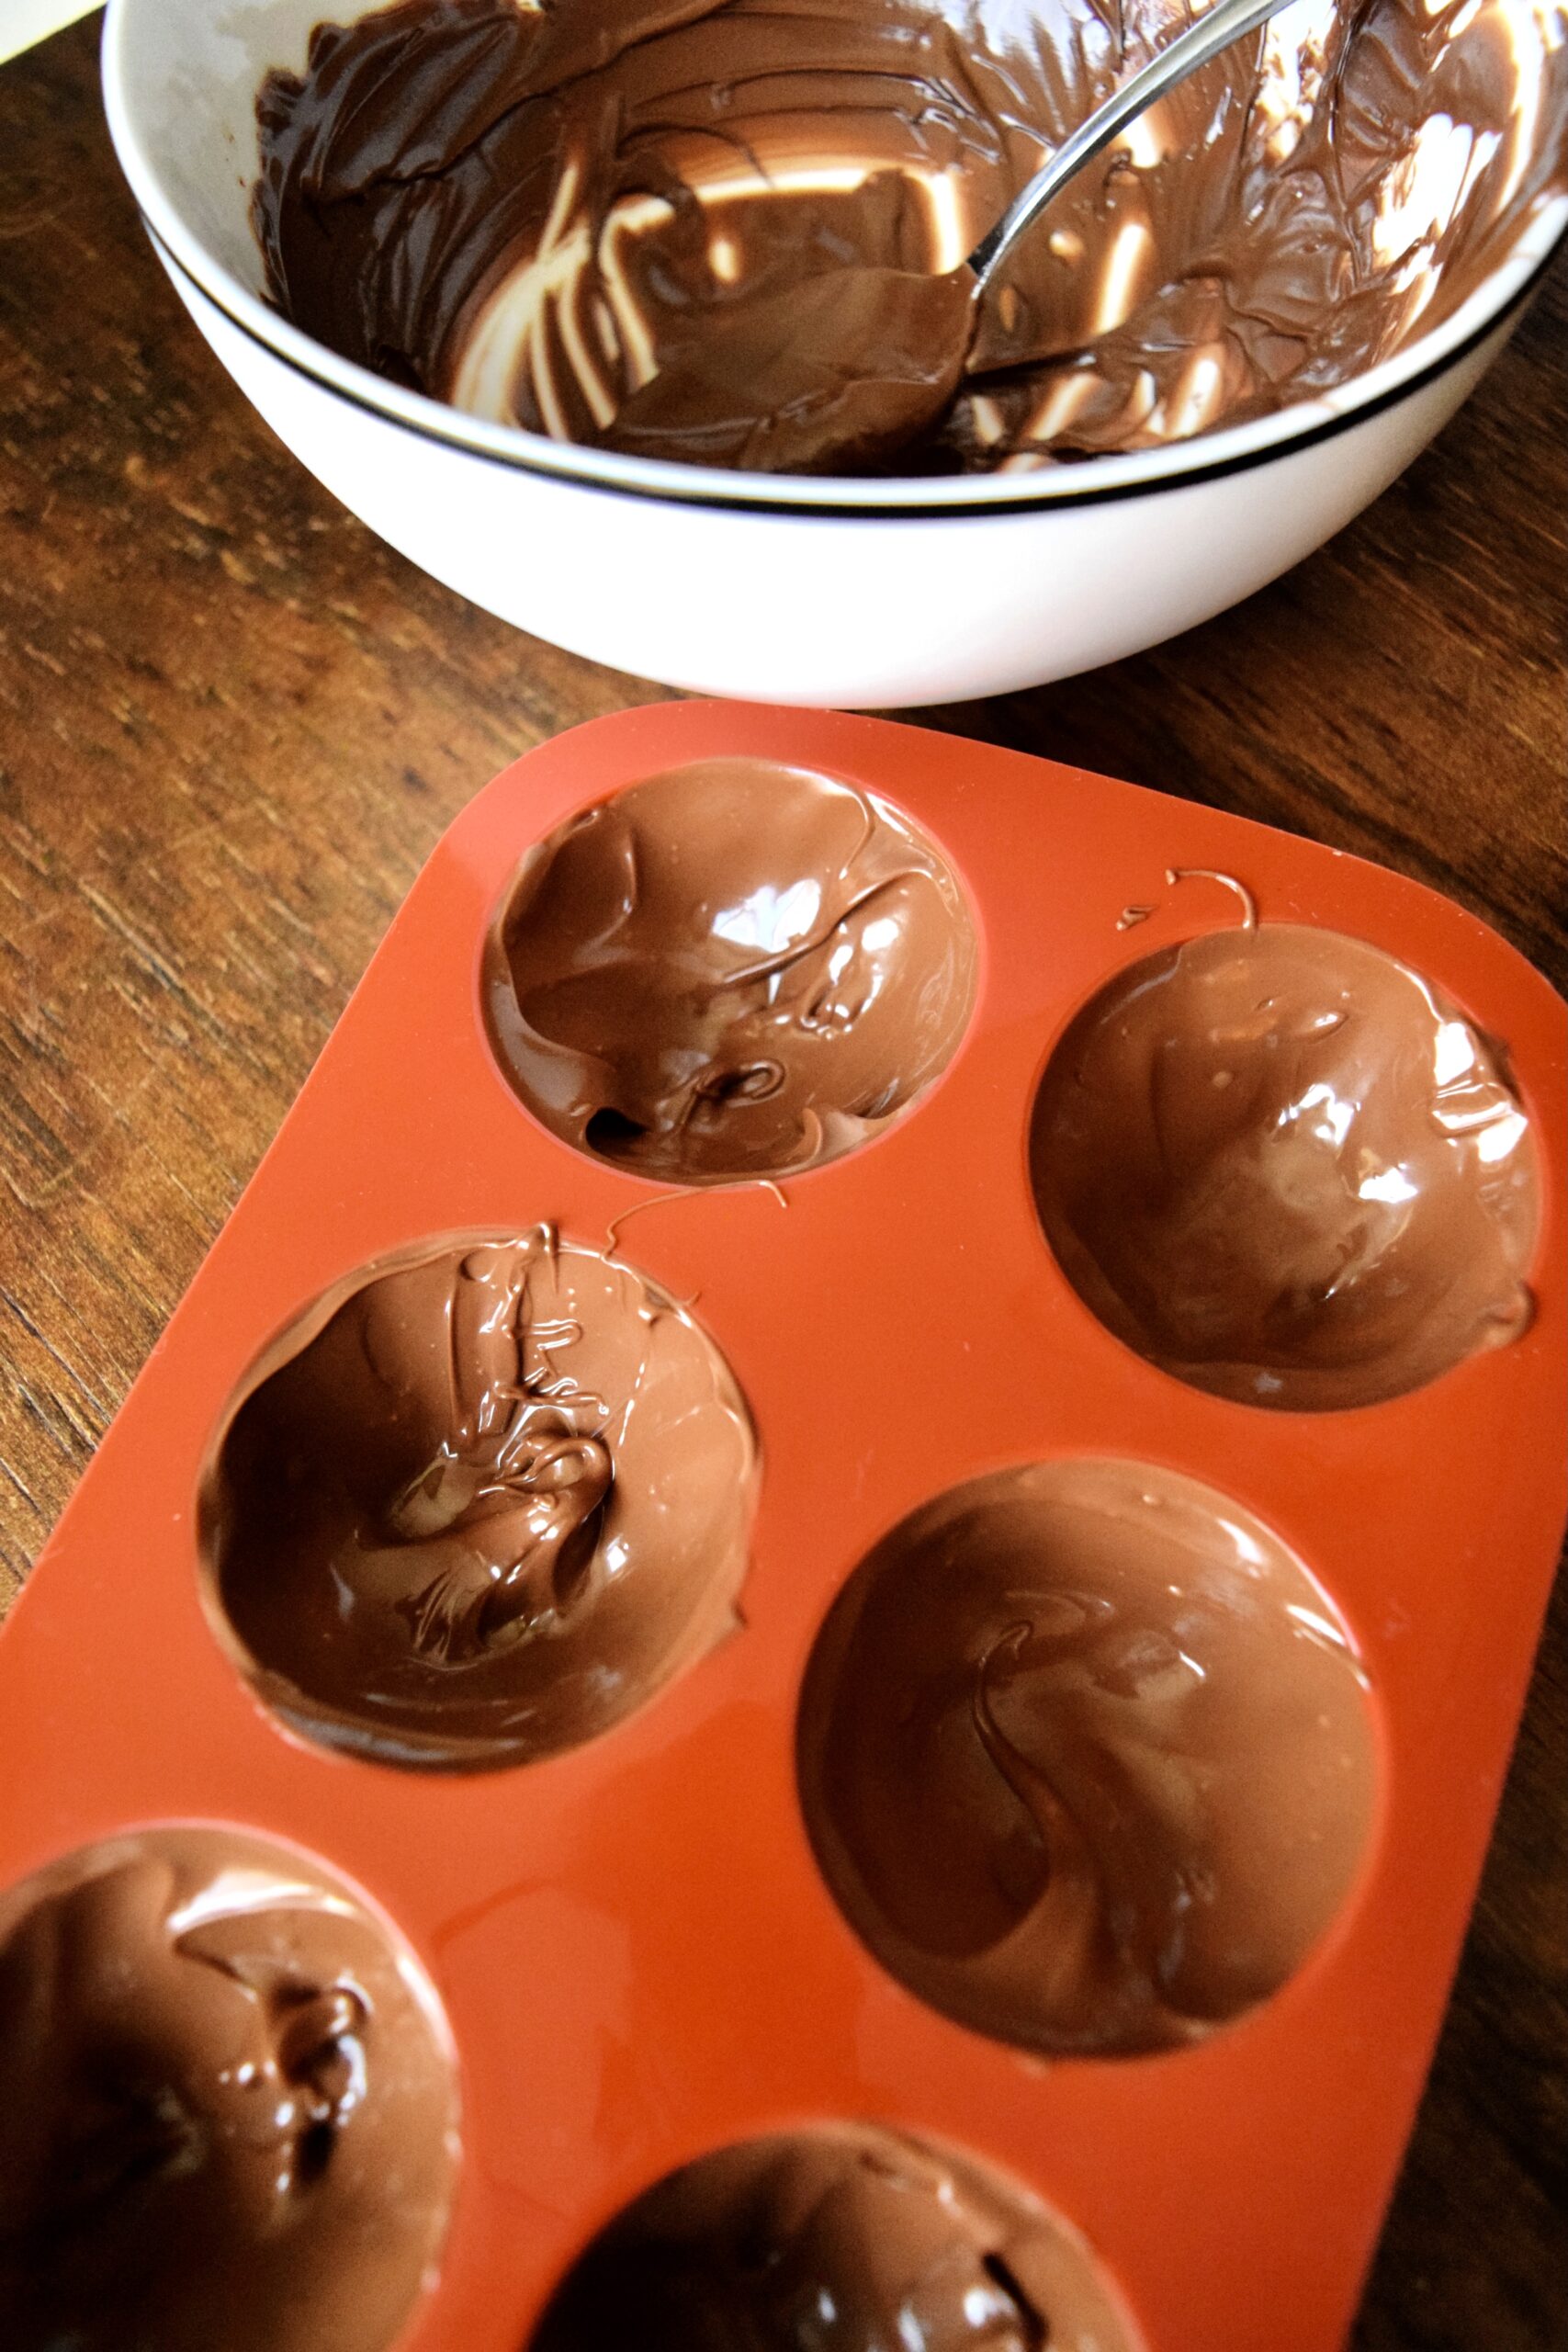 use a spoon to coat the moulds in chocolate